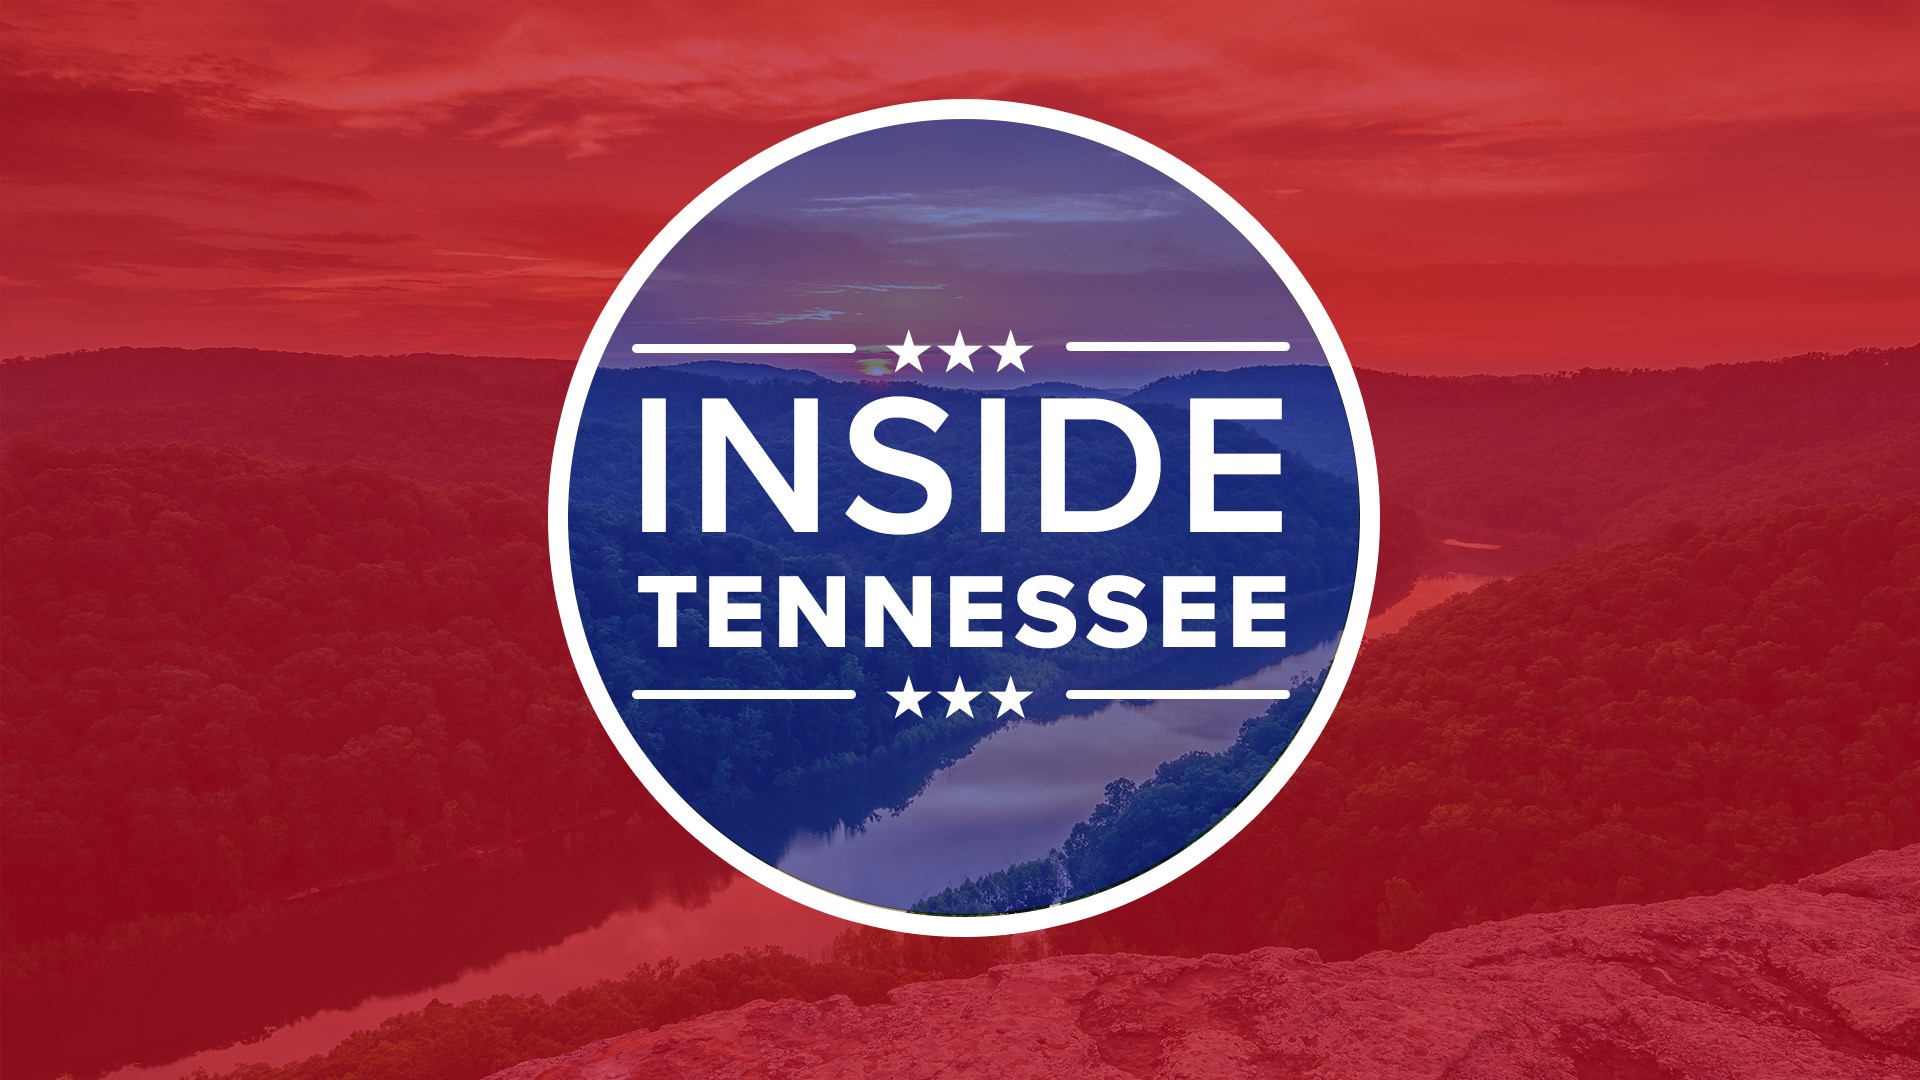 A roundtable addressing political issues facing Tennesseans today featuring local and state newsmakers.